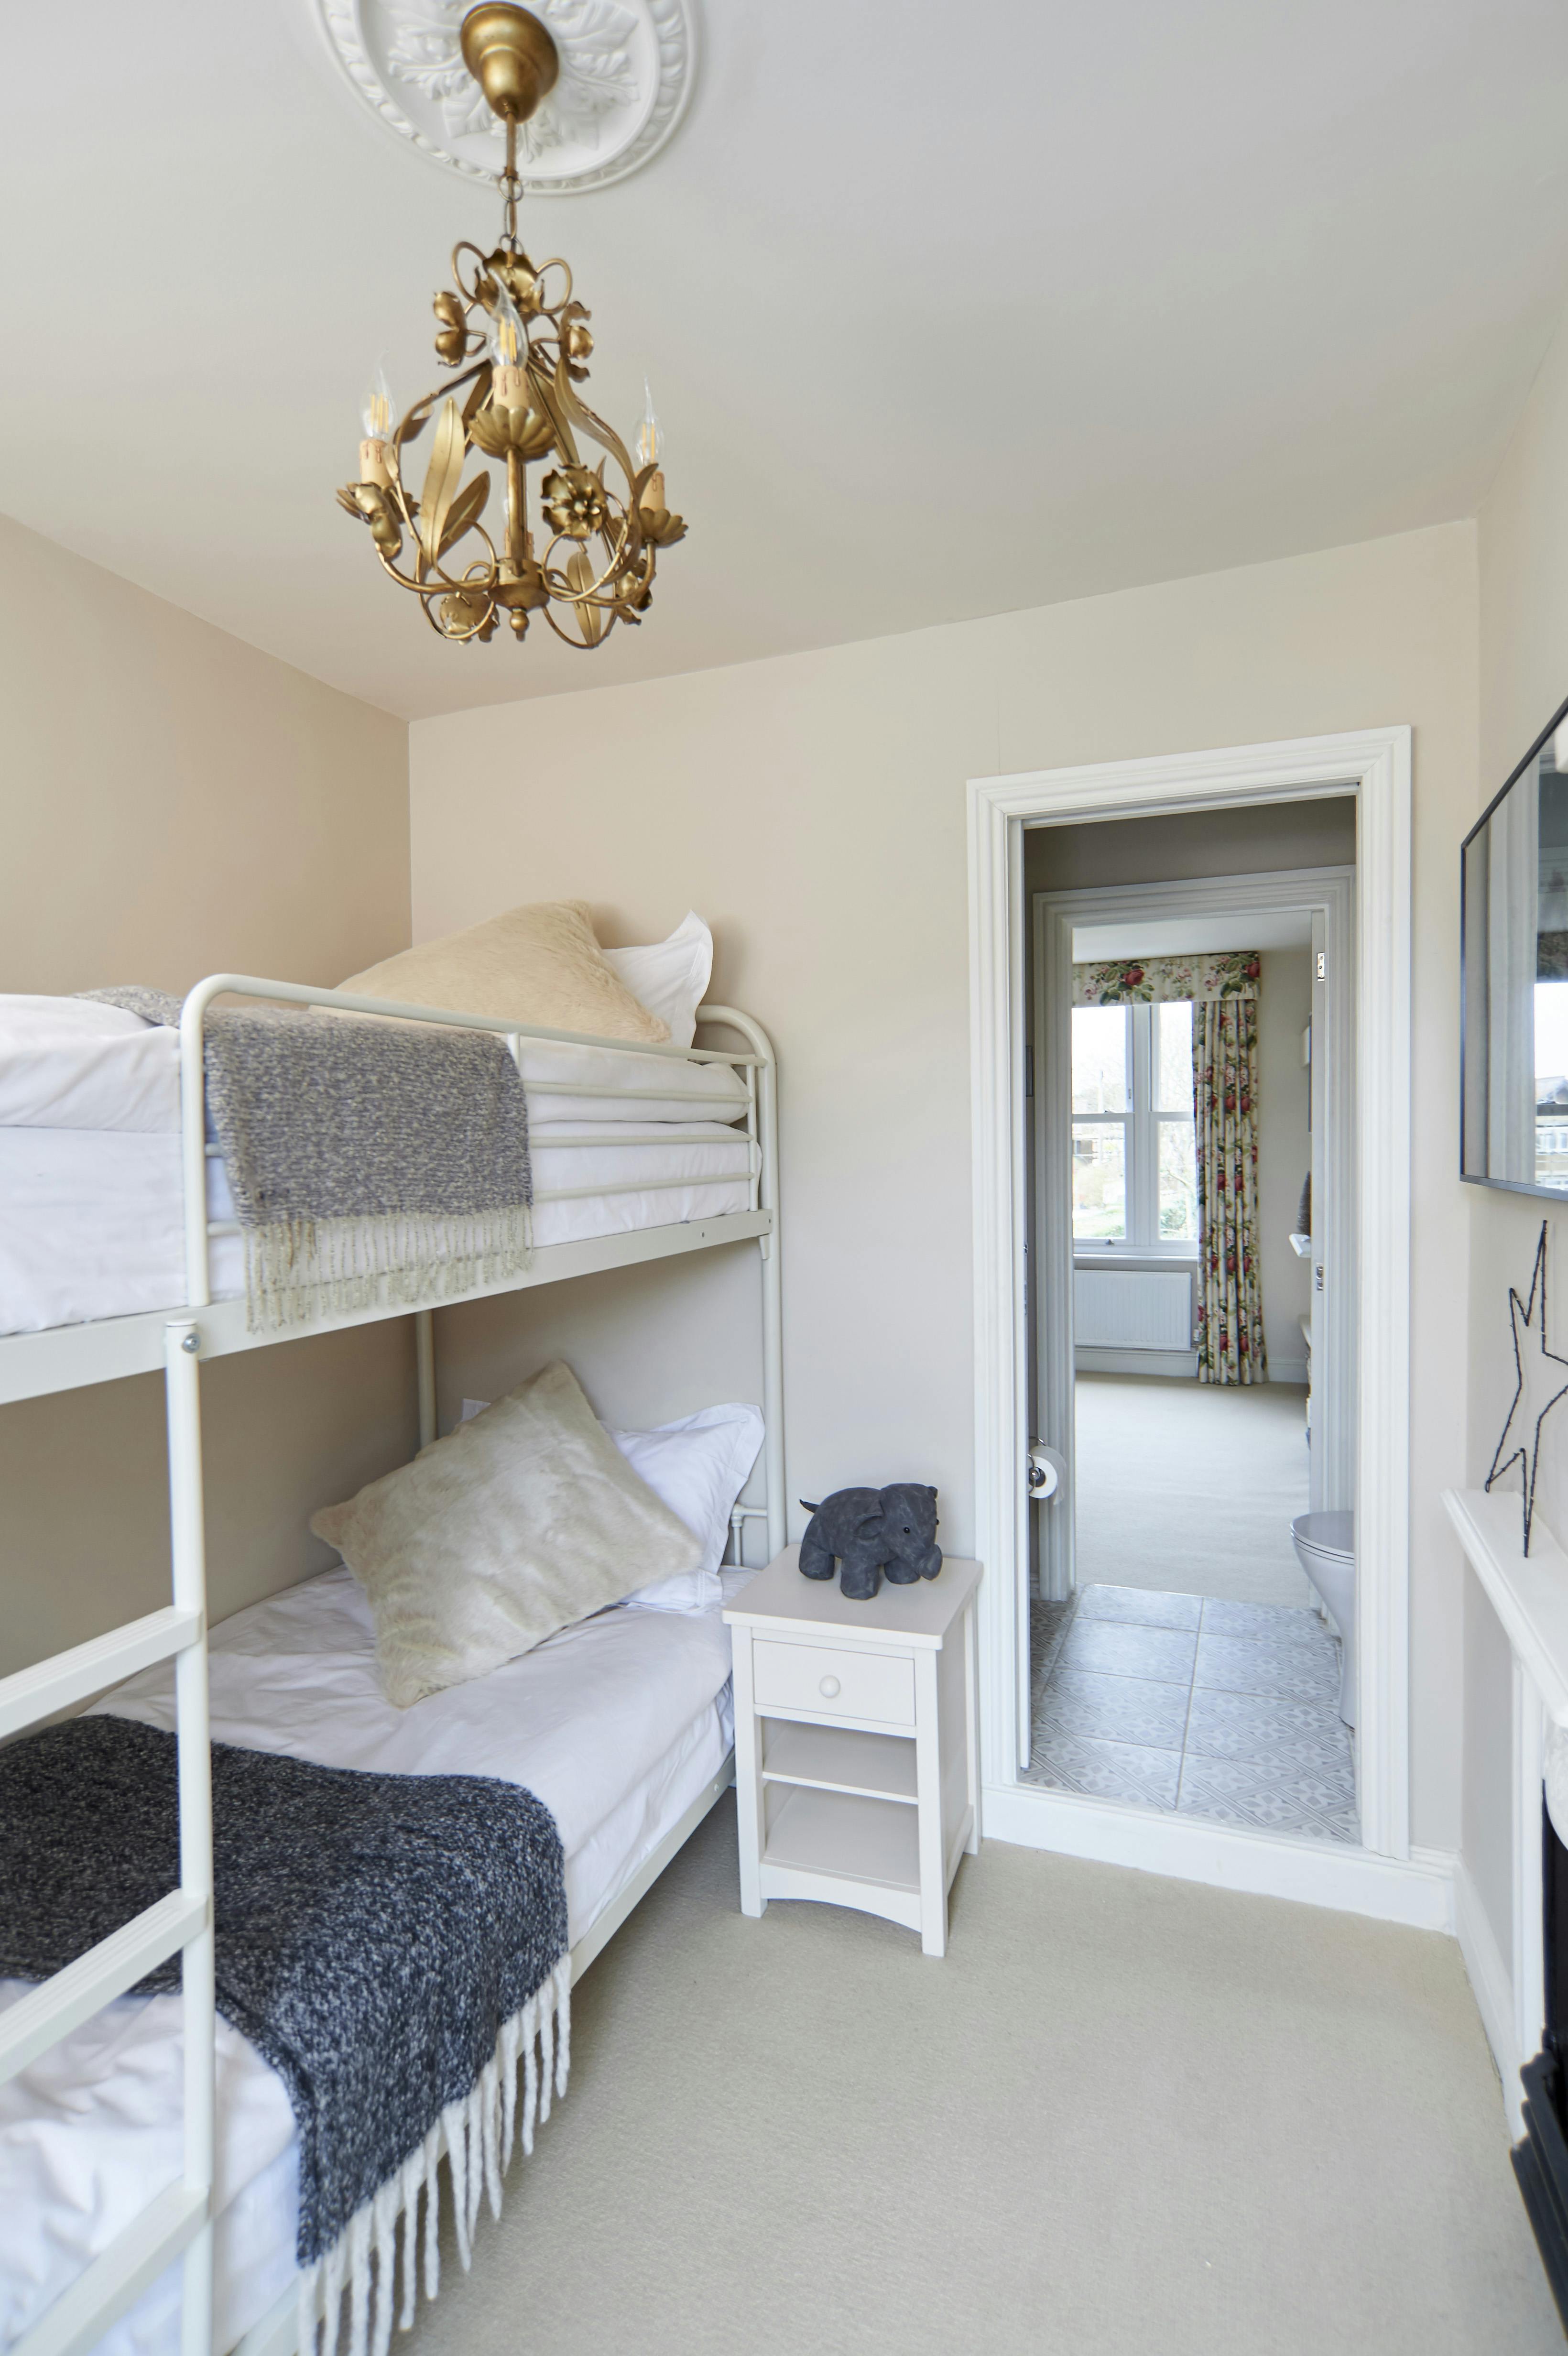 Bunk Room Beds and sidetable through to Jack and Jill ensuite linking to Master Bedroom